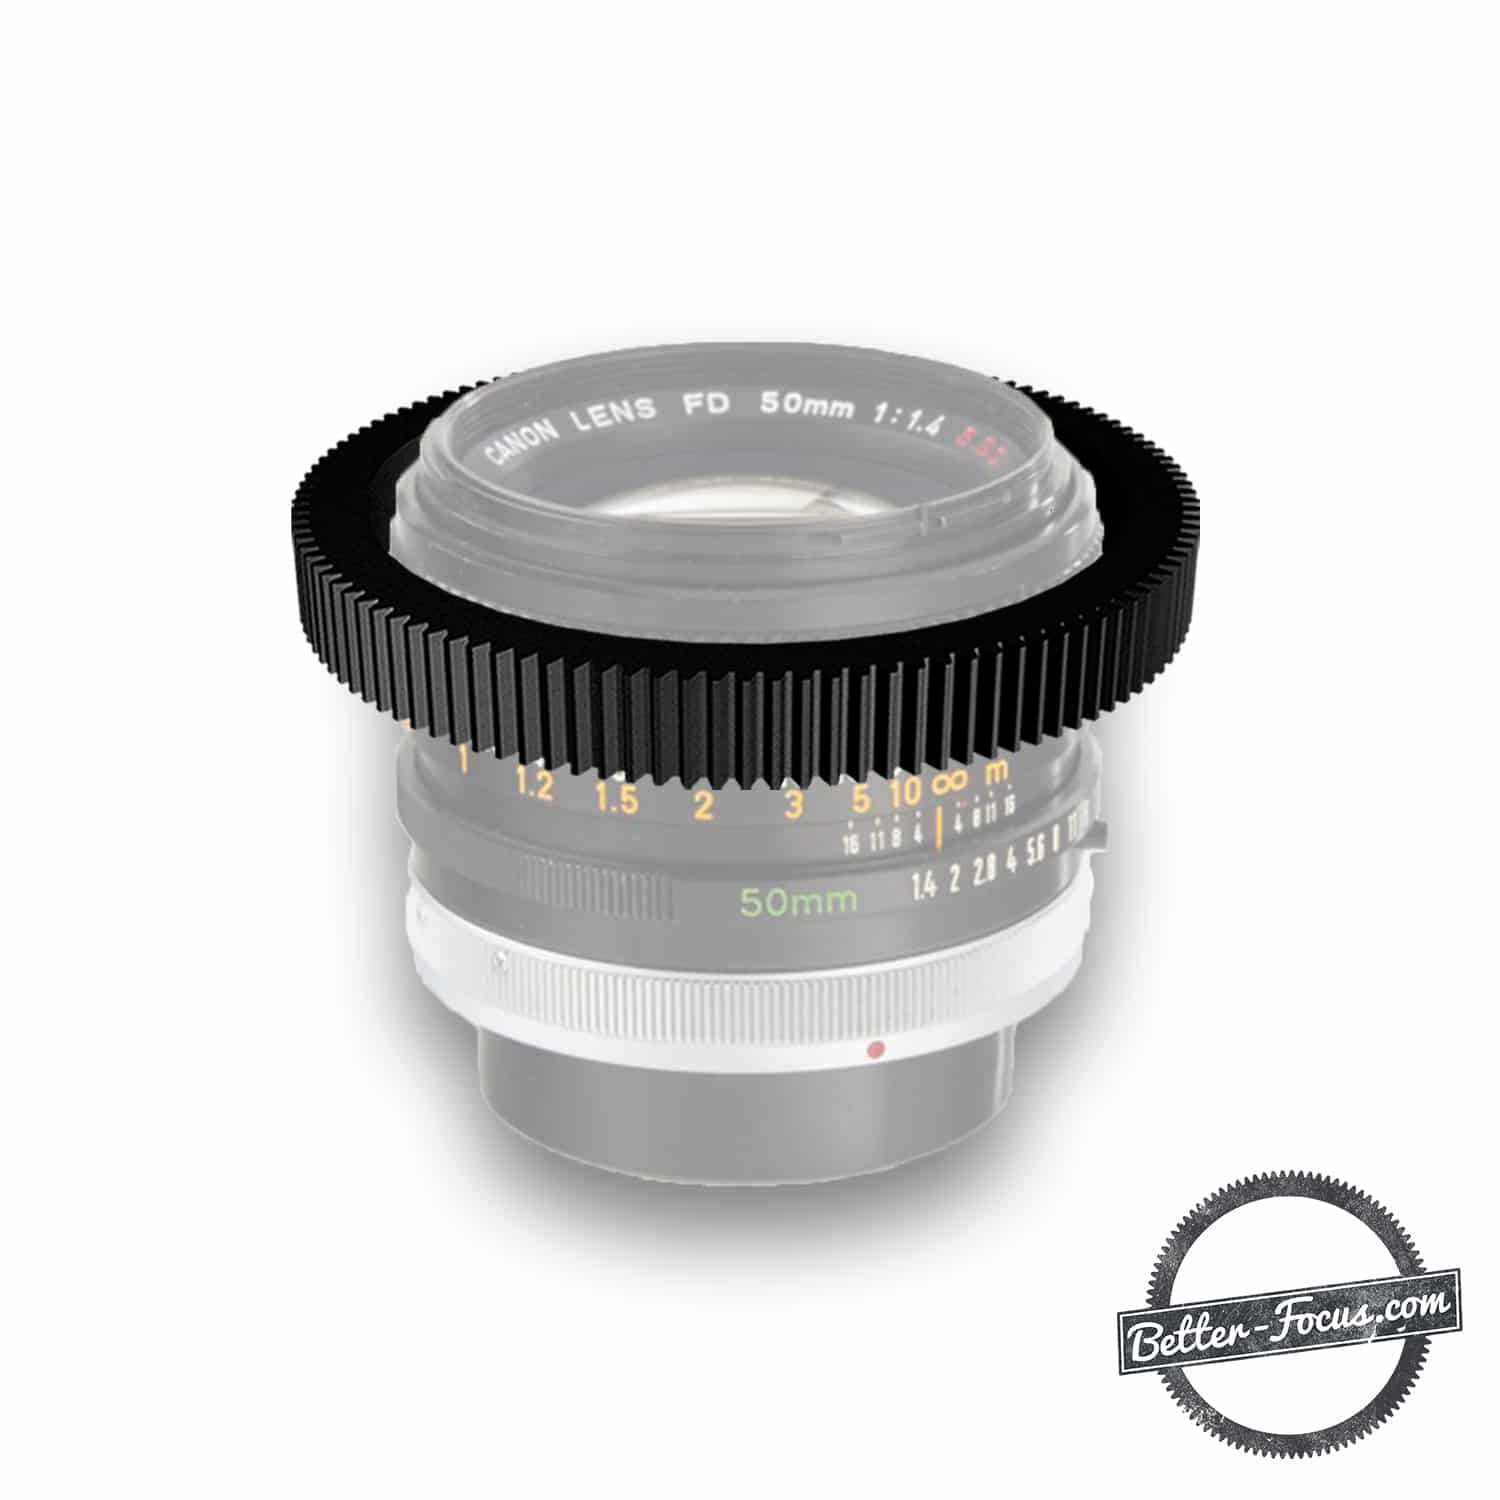 Perfect fitting Follow Focus Gear for CANON FD 50MM F1.4 S.S.C. lens